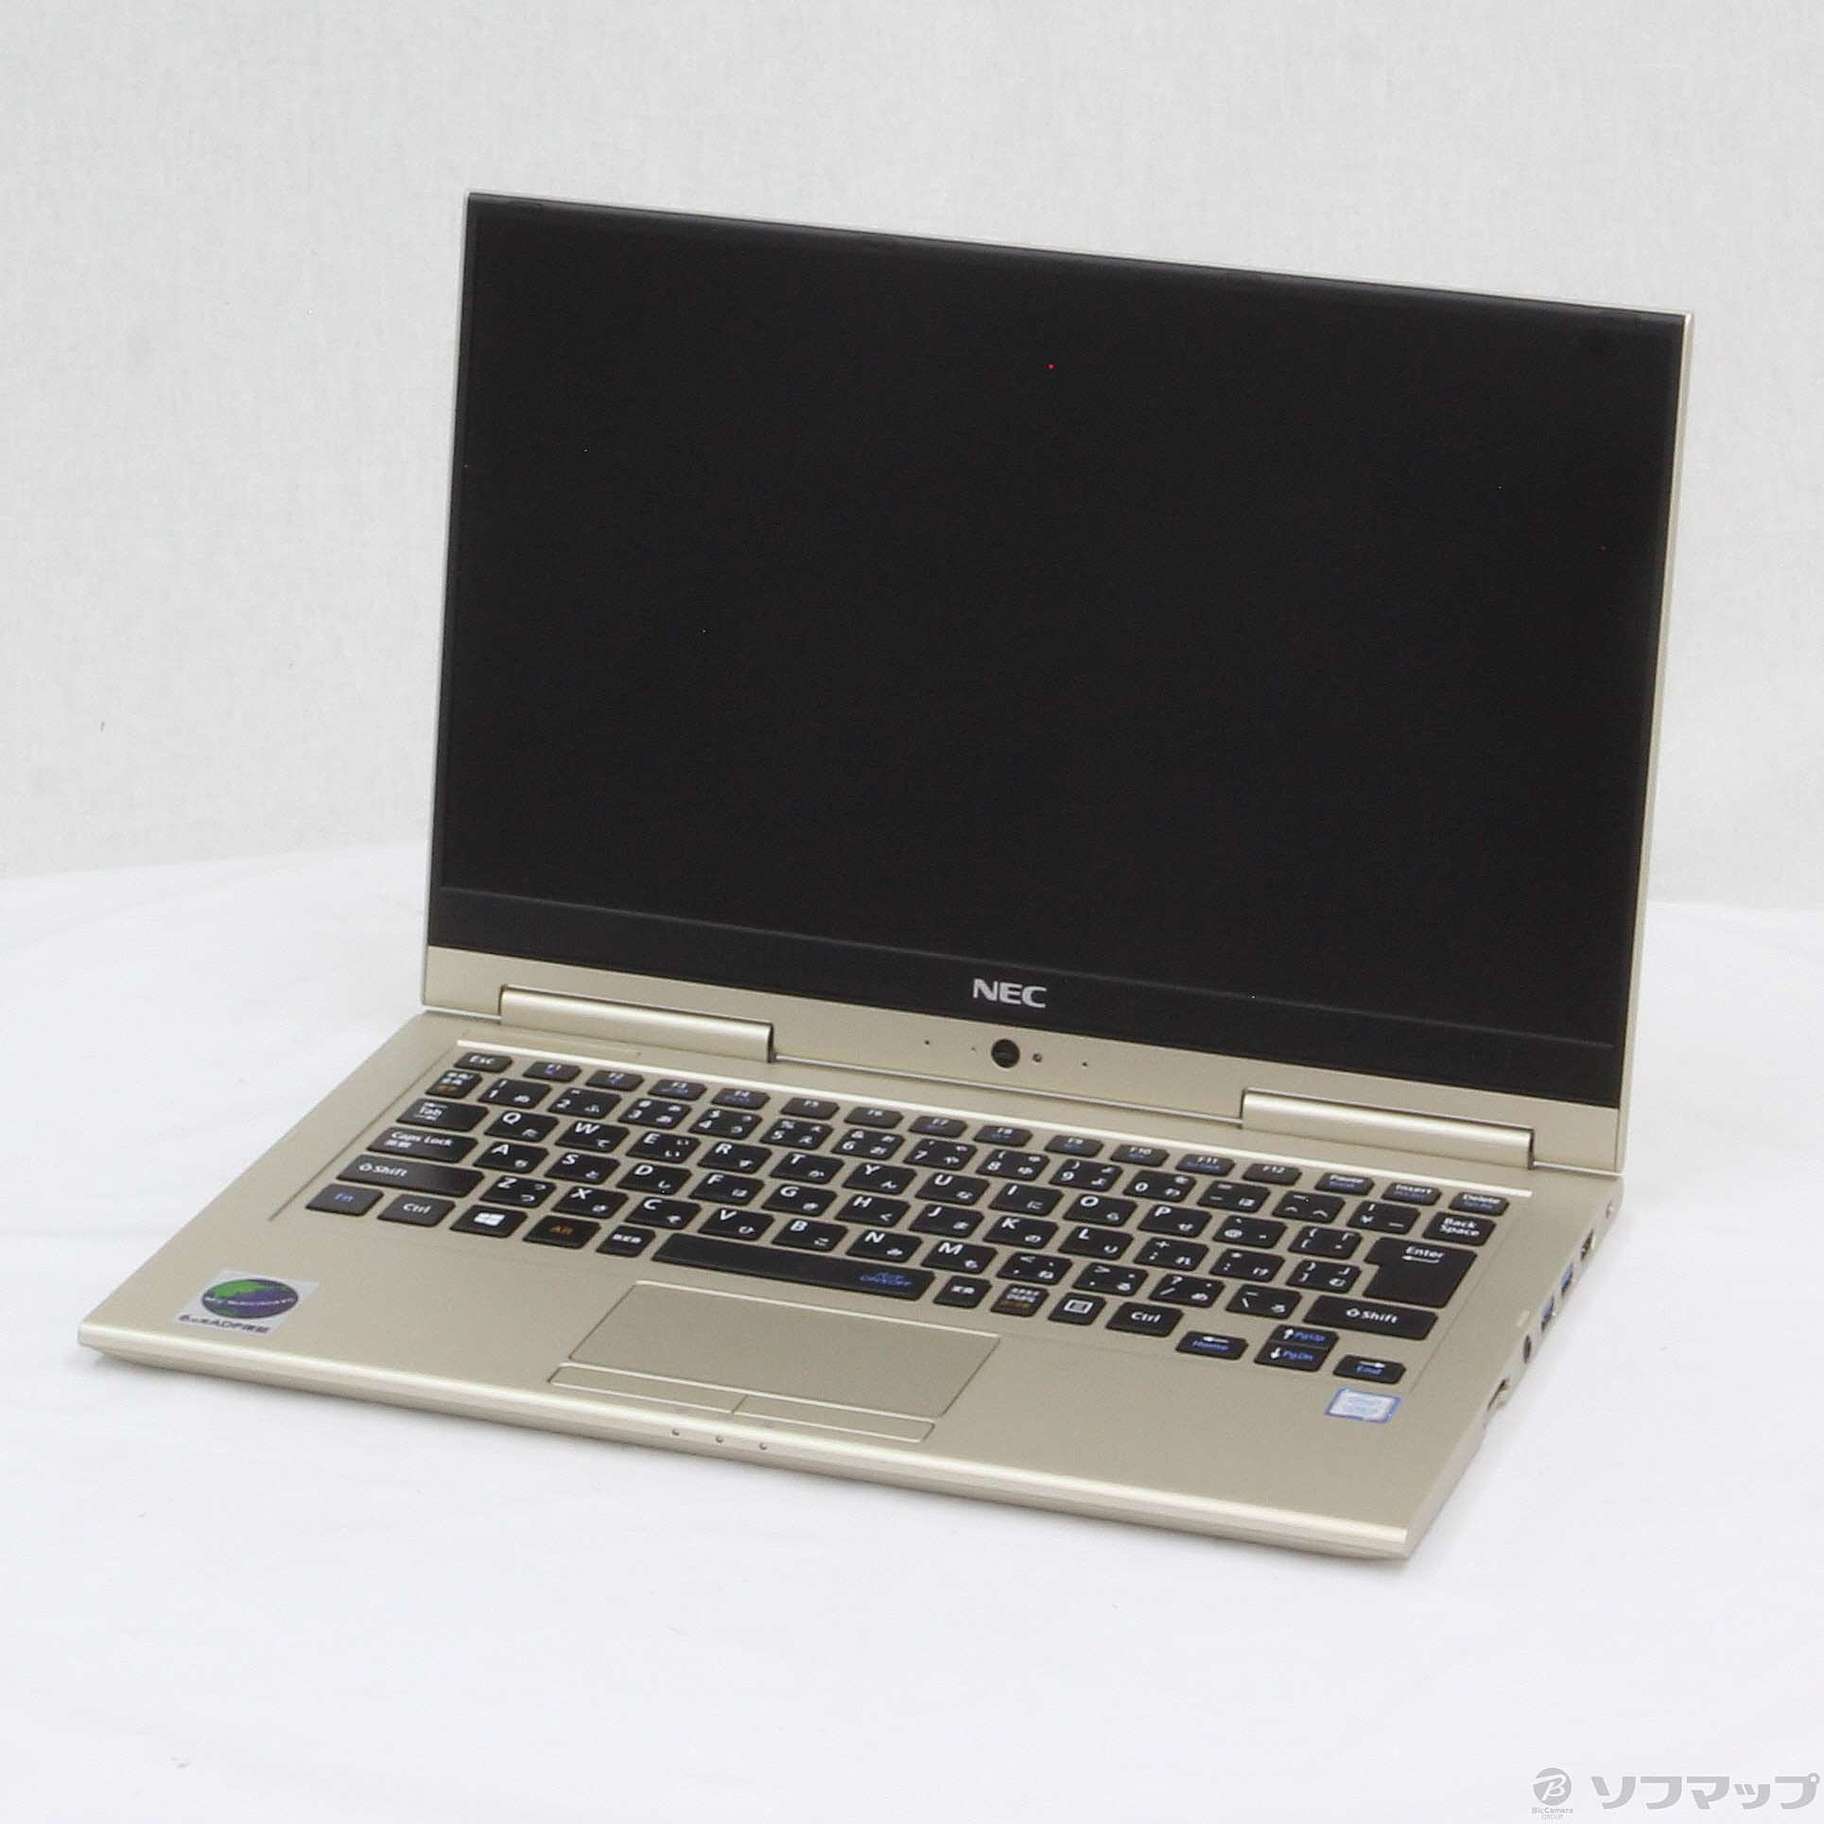 LAVIE Direct HZ PC-GN254W1AA 〔NEC Refreshed PC〕 〔Windows 10〕 ≪メーカー保証あり≫